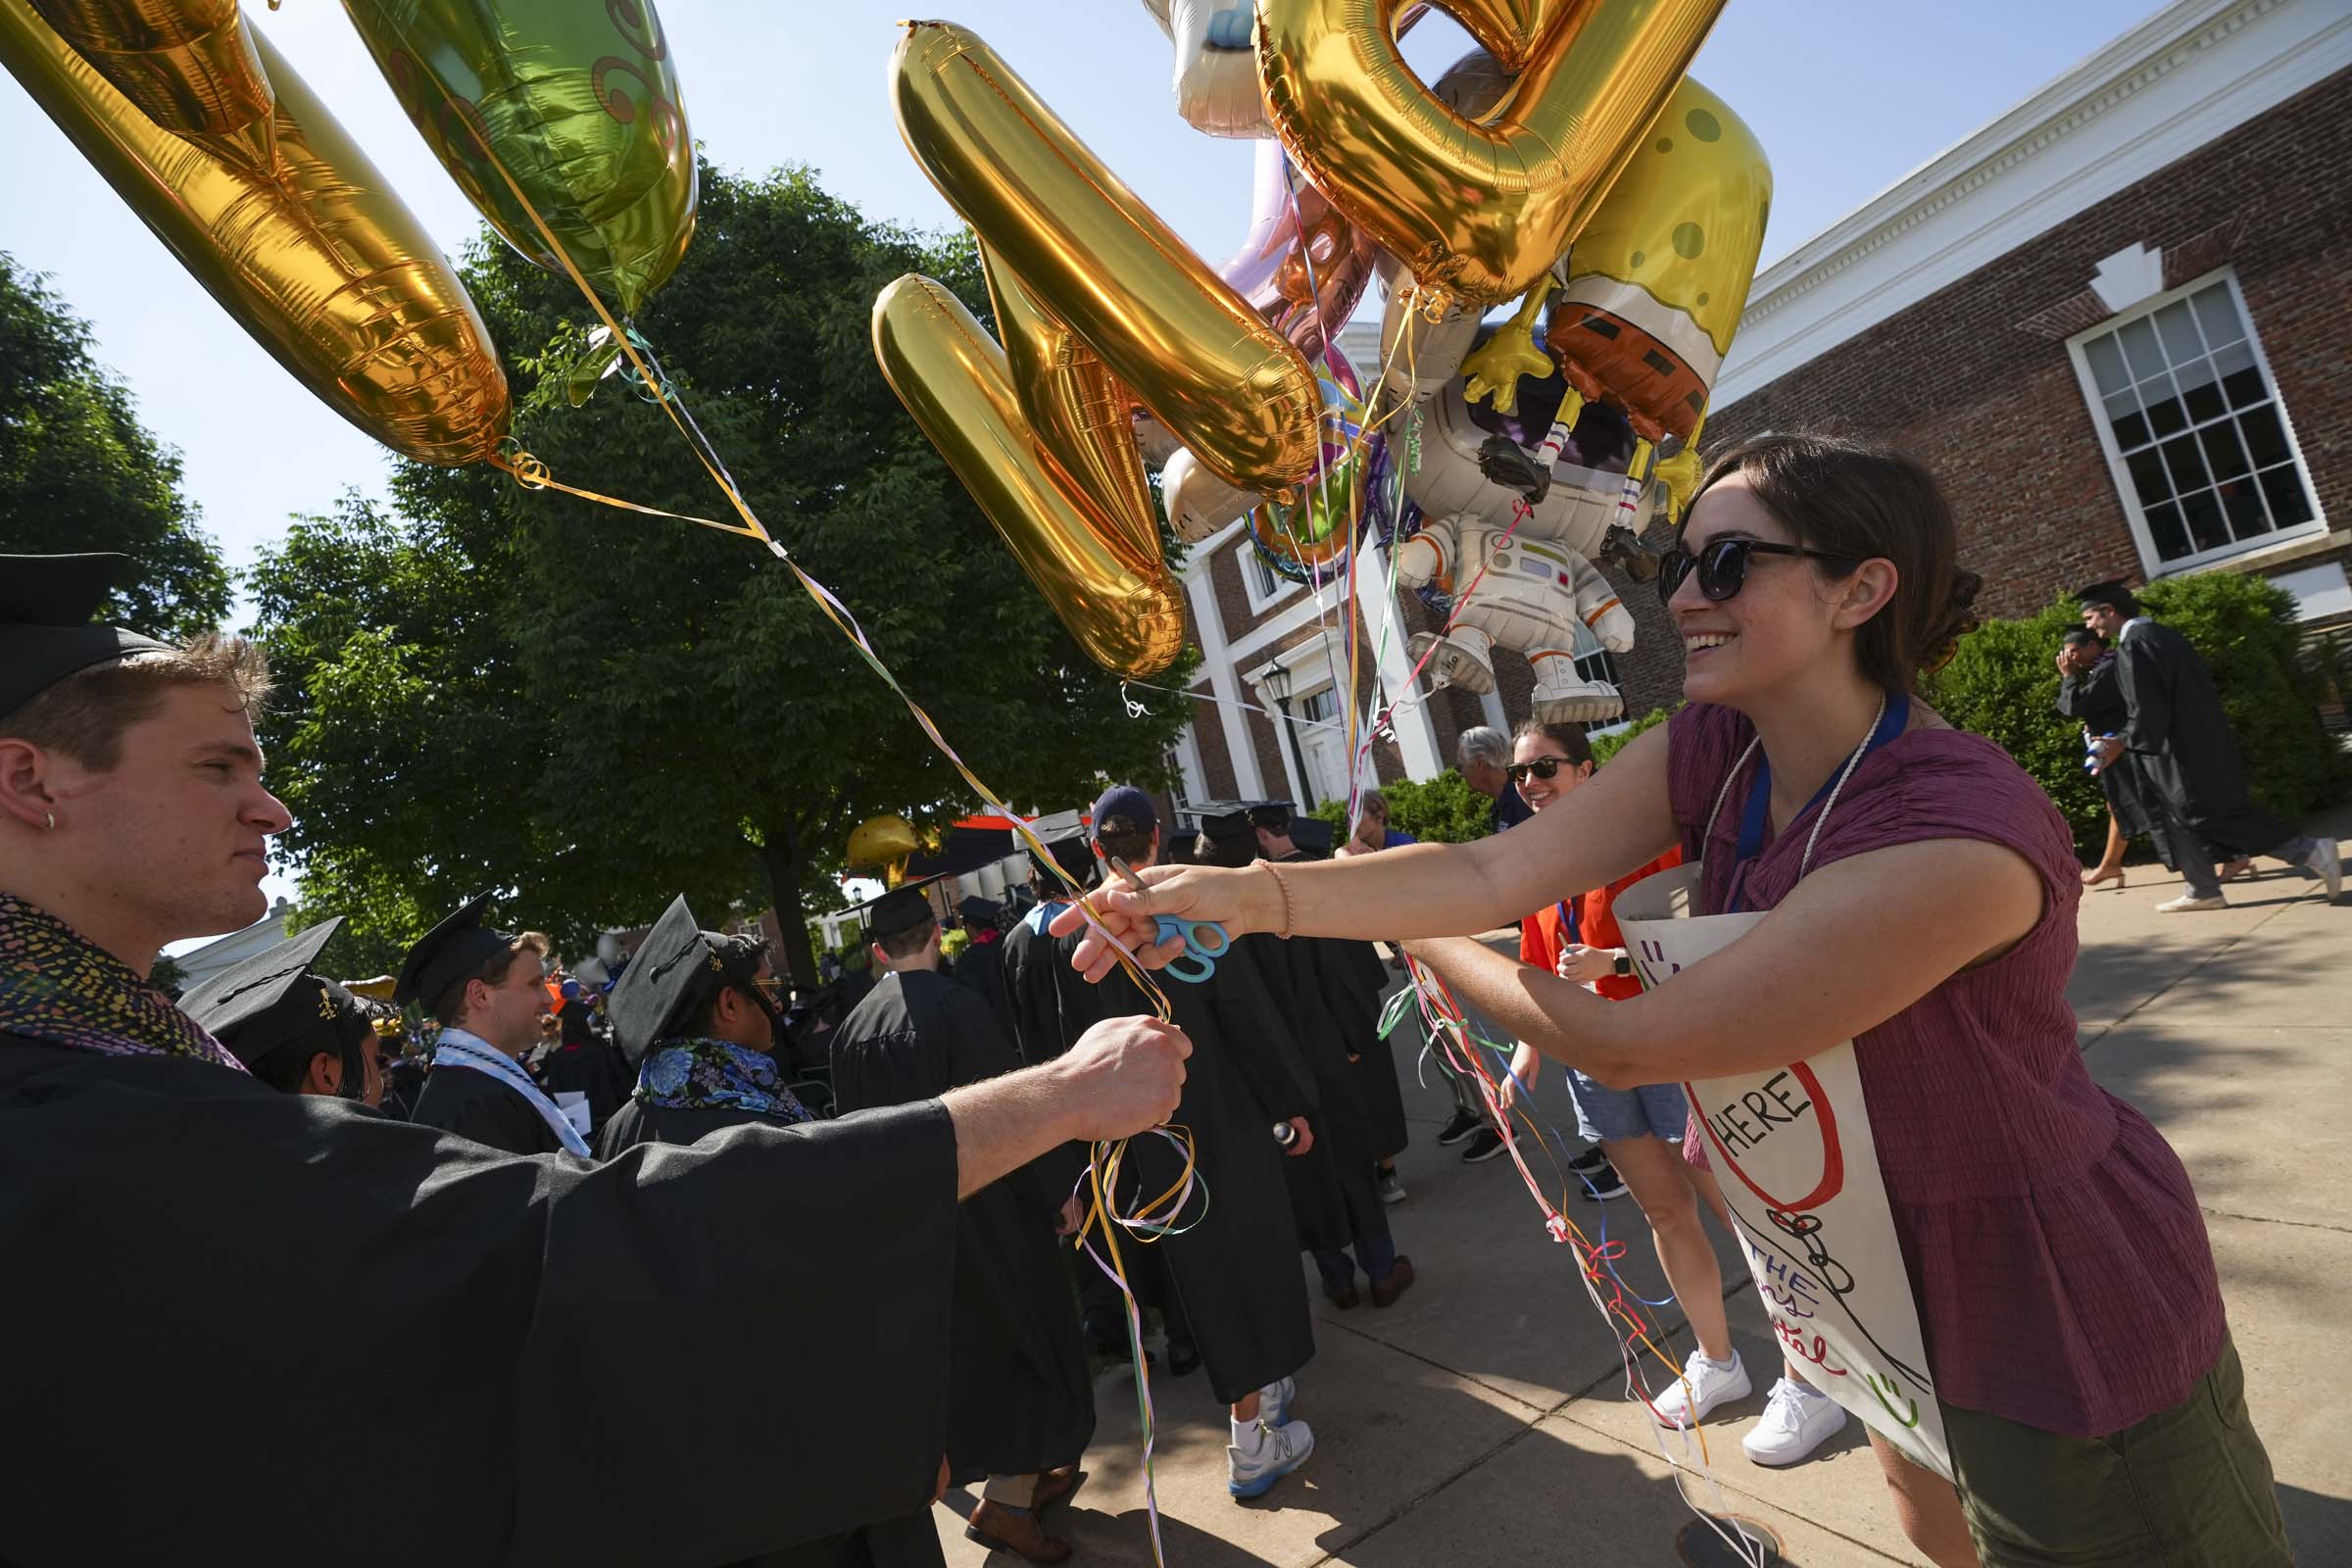 A woman wearing a sign accepts balloons from a student in the crowd.